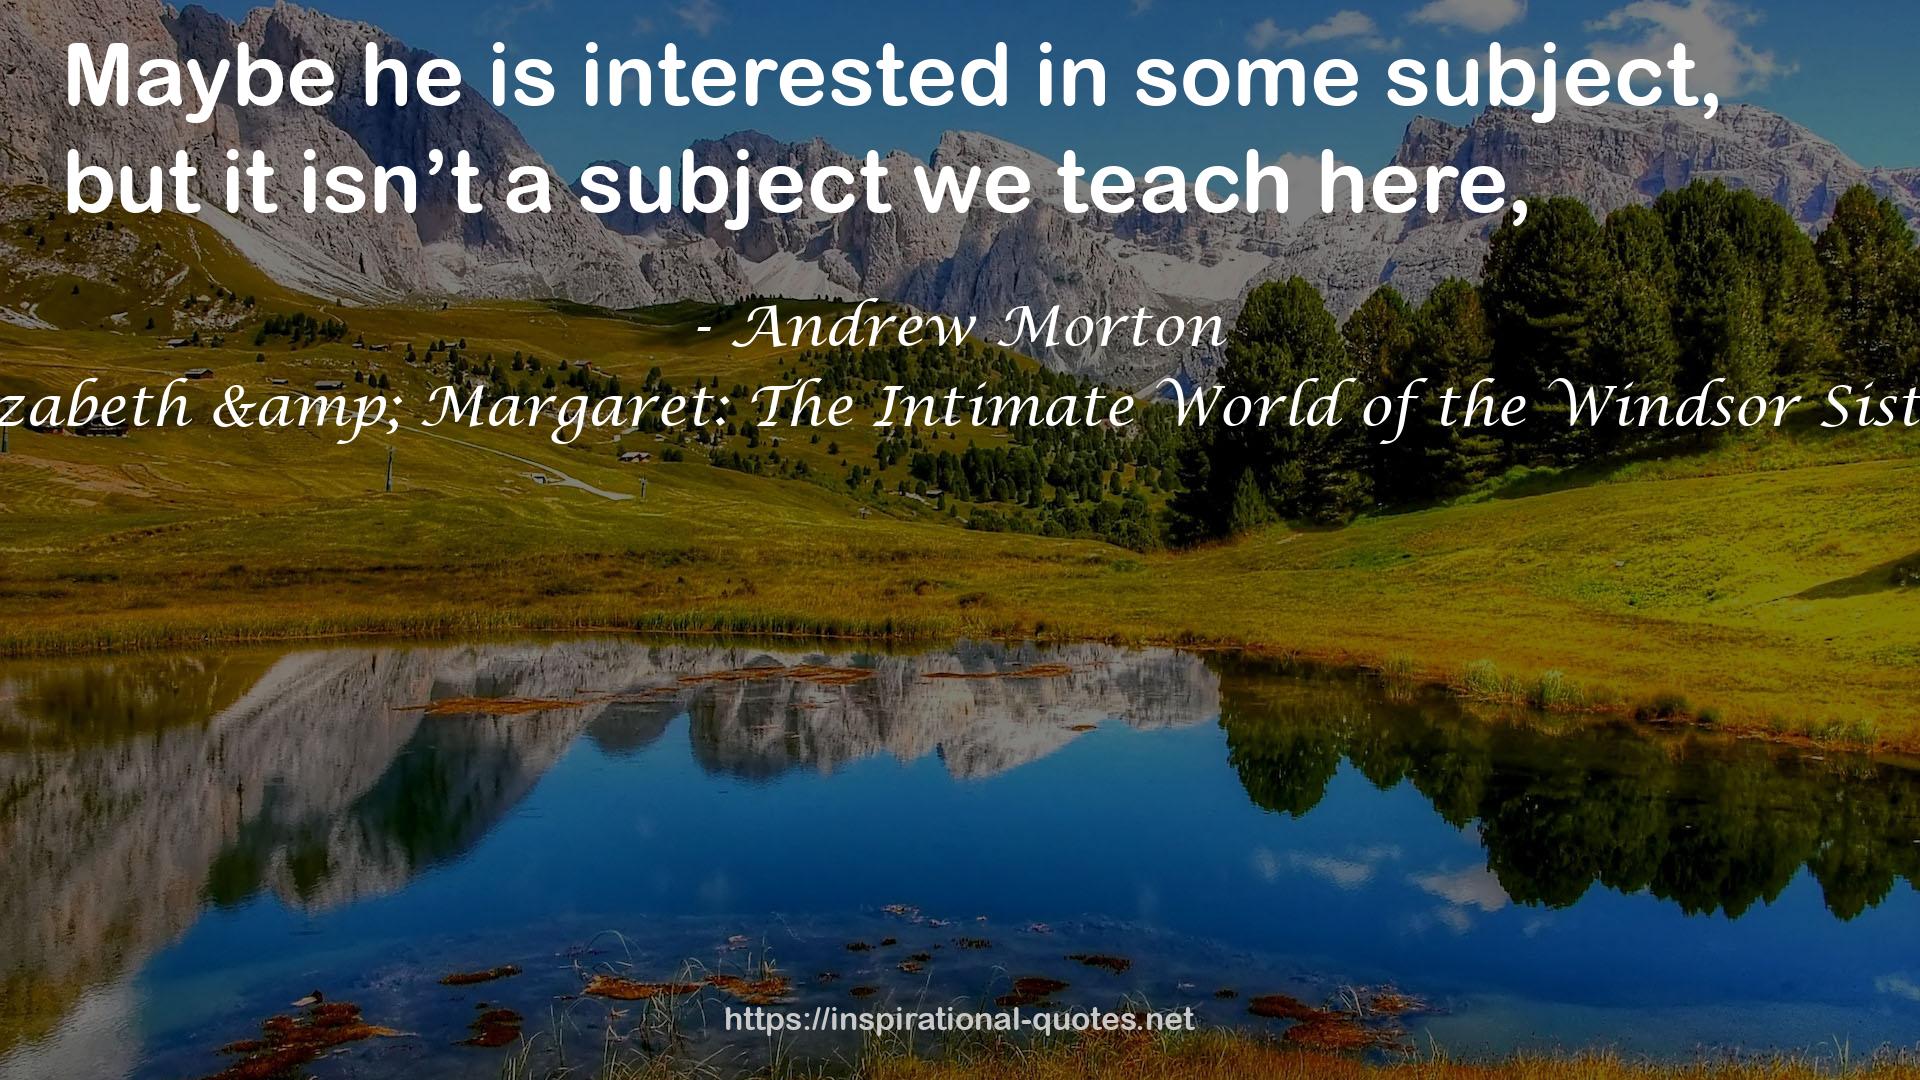 Elizabeth & Margaret: The Intimate World of the Windsor Sisters QUOTES